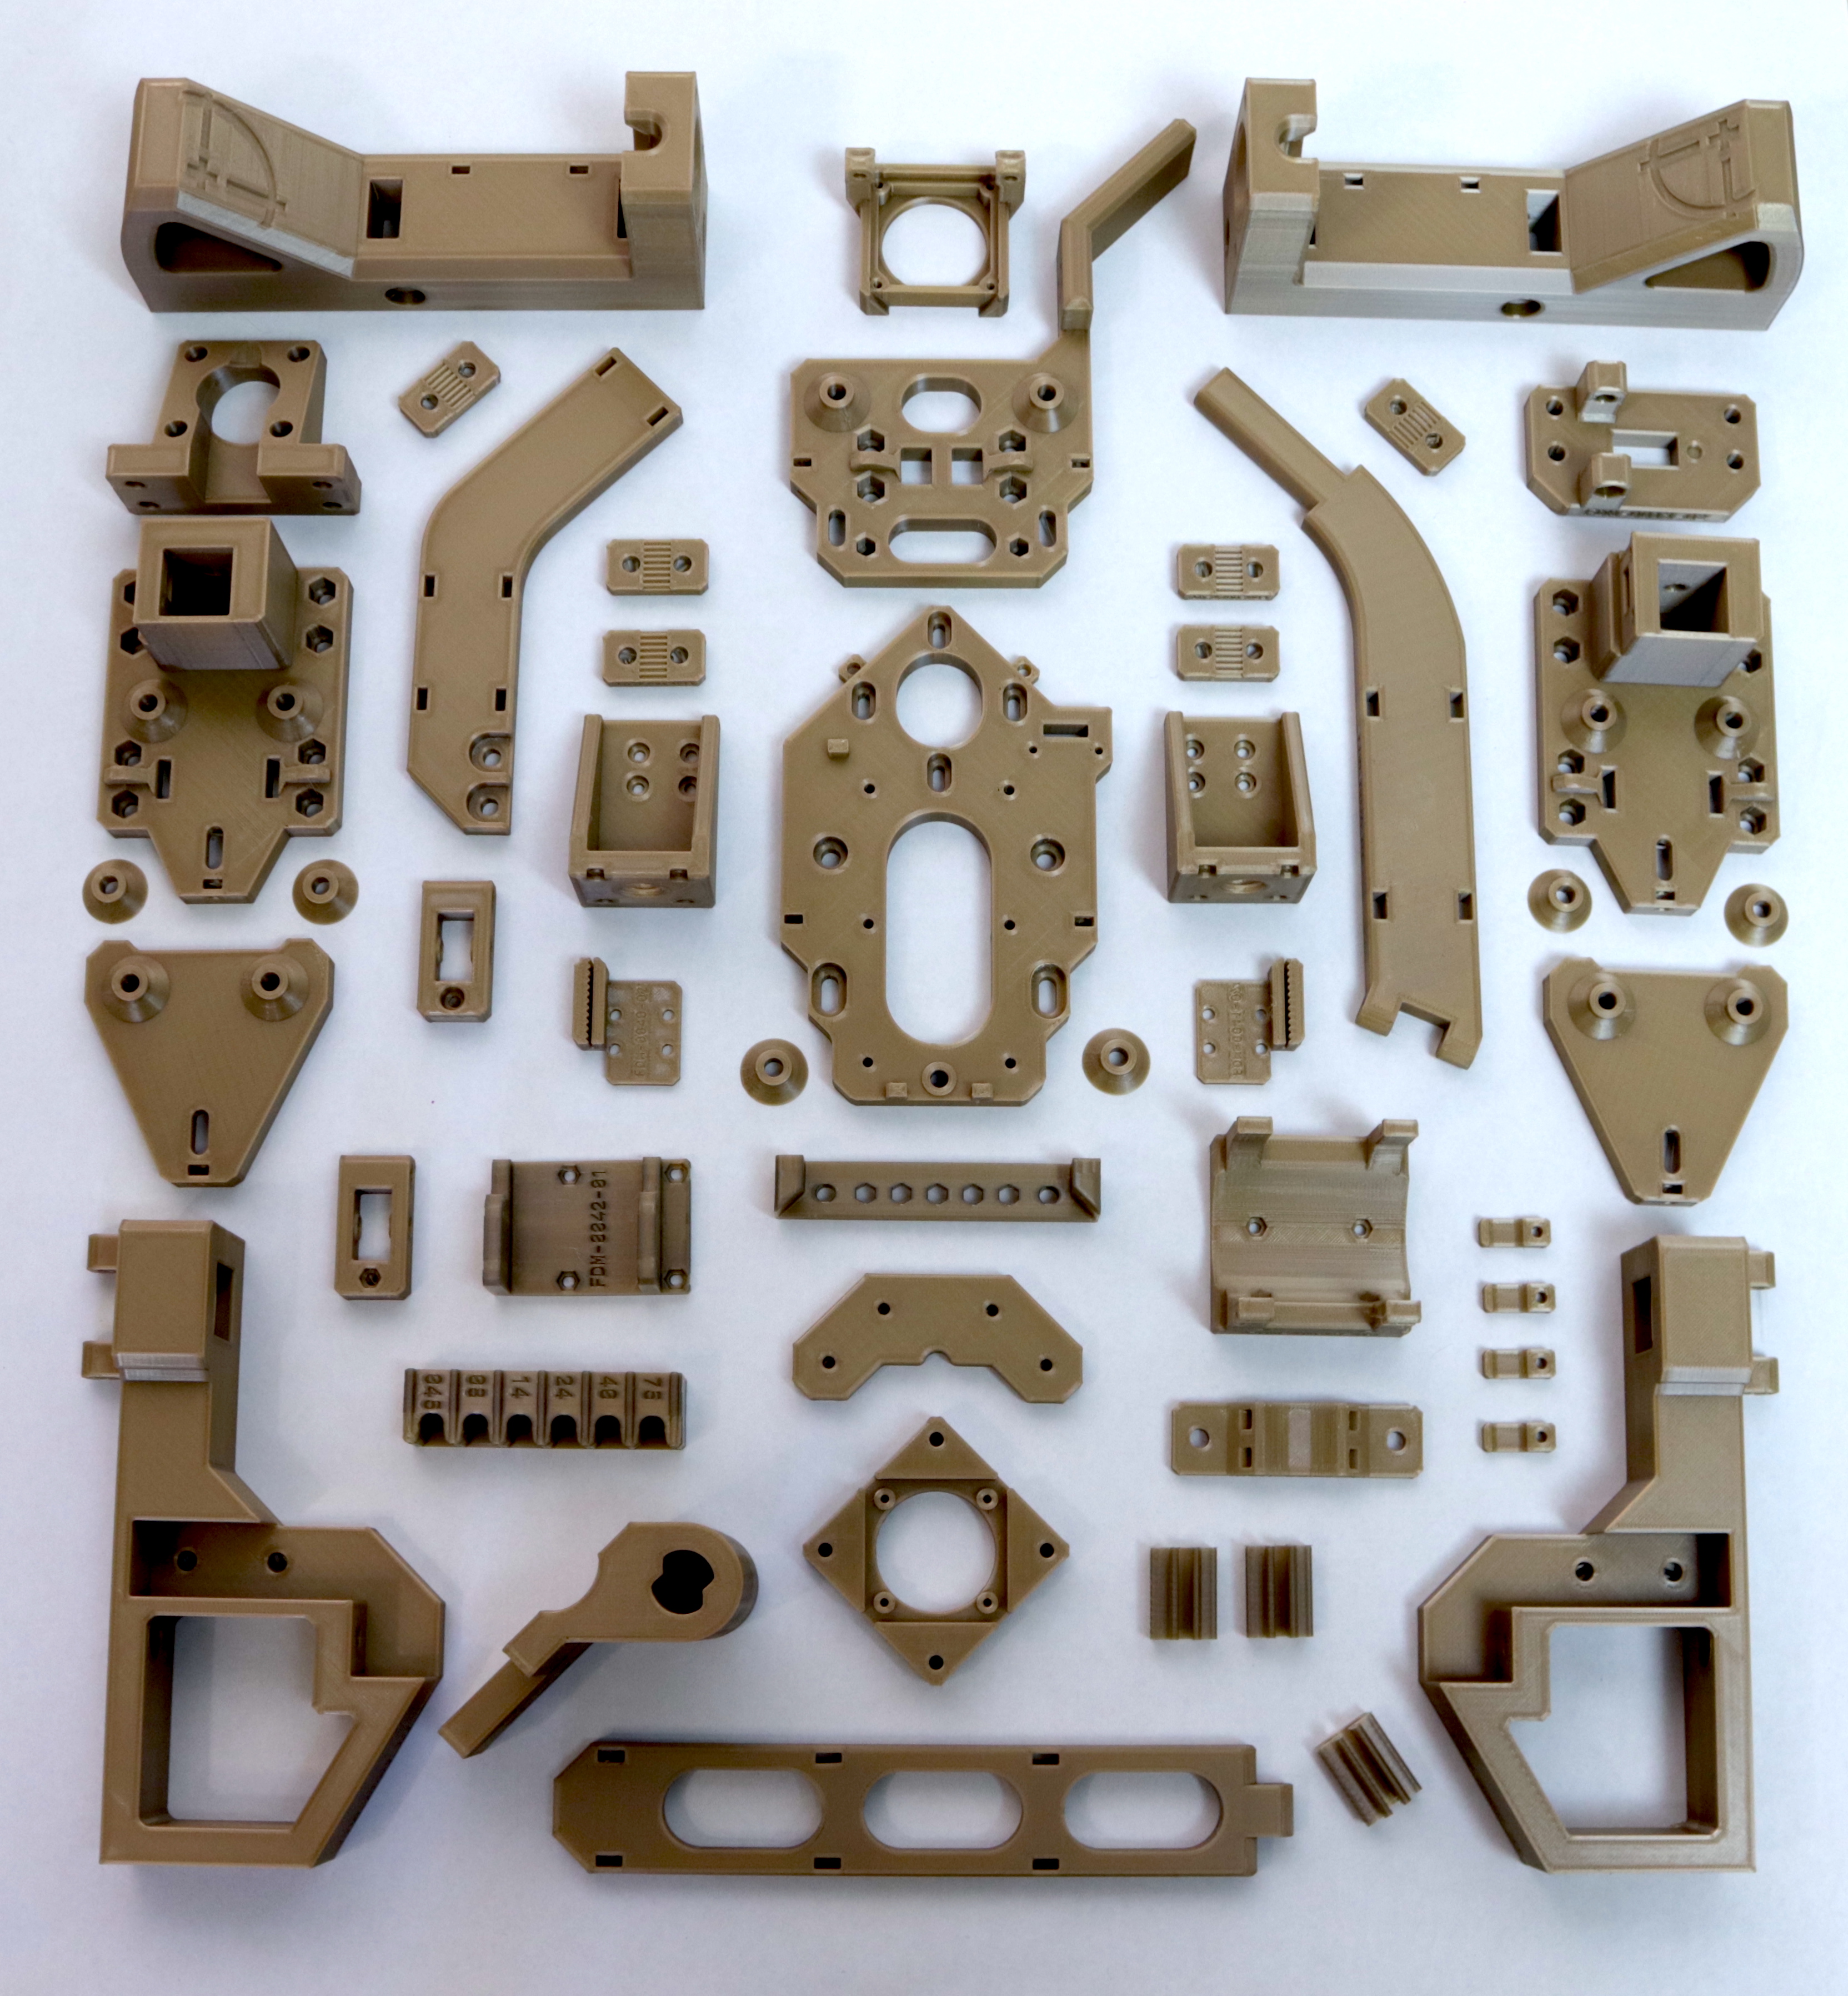 All 3D printed parts